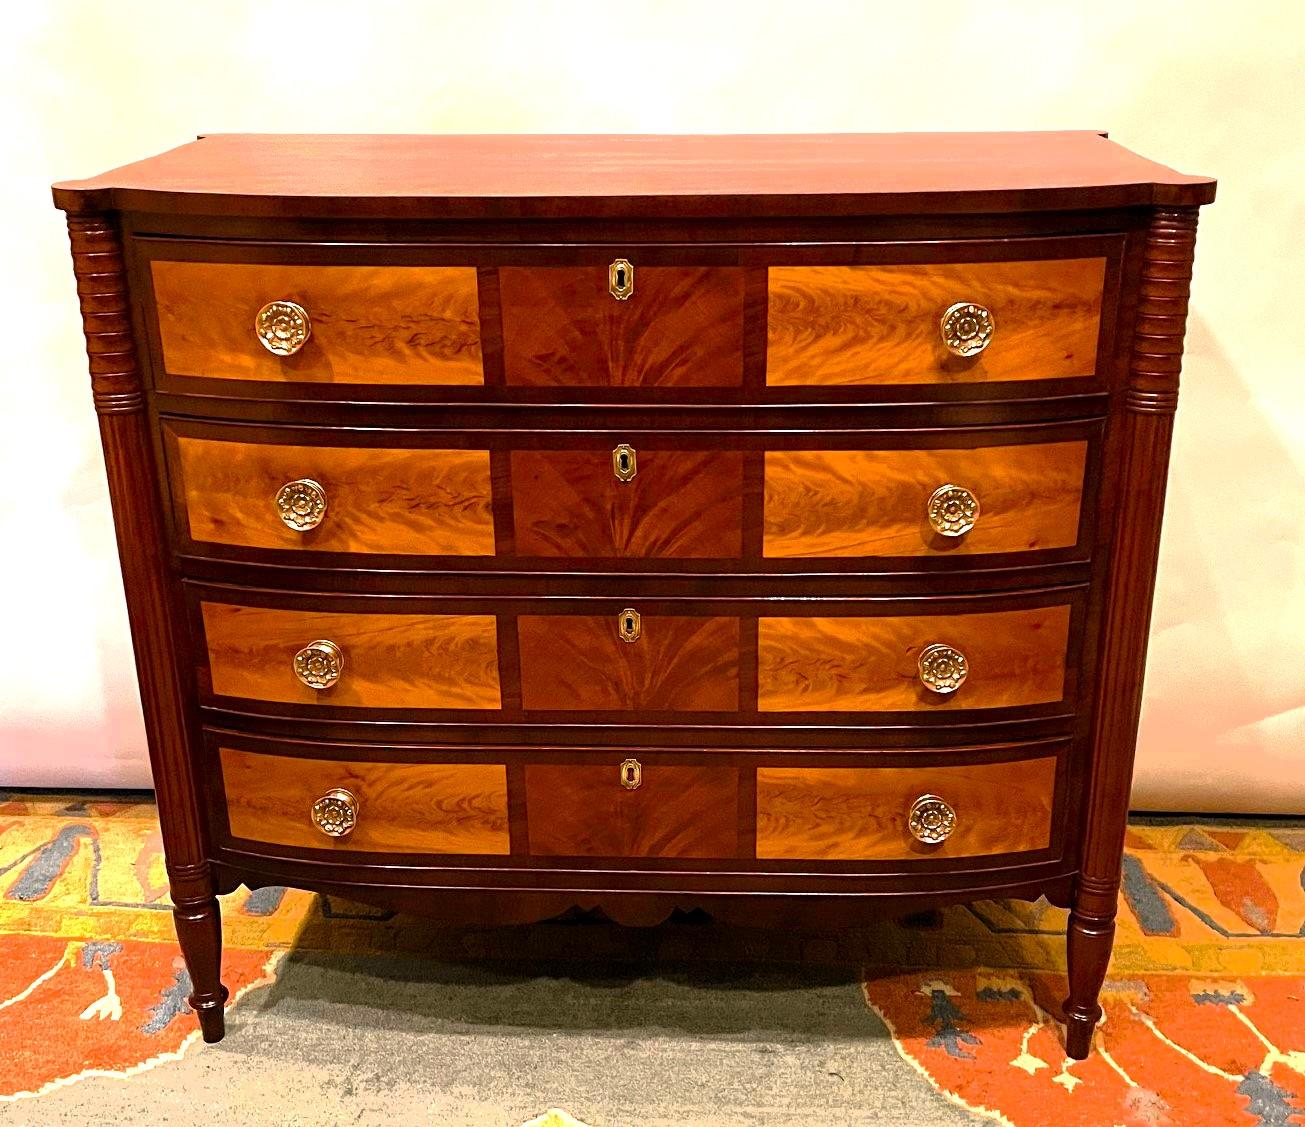 This Sheraton inspired  chest is indicative of the work done by cabinet makers in and around Portsmouth, New Hampshire in the late 18th and early 19th Centuries. The stunning look of this piece is created by the combination of woods used on the